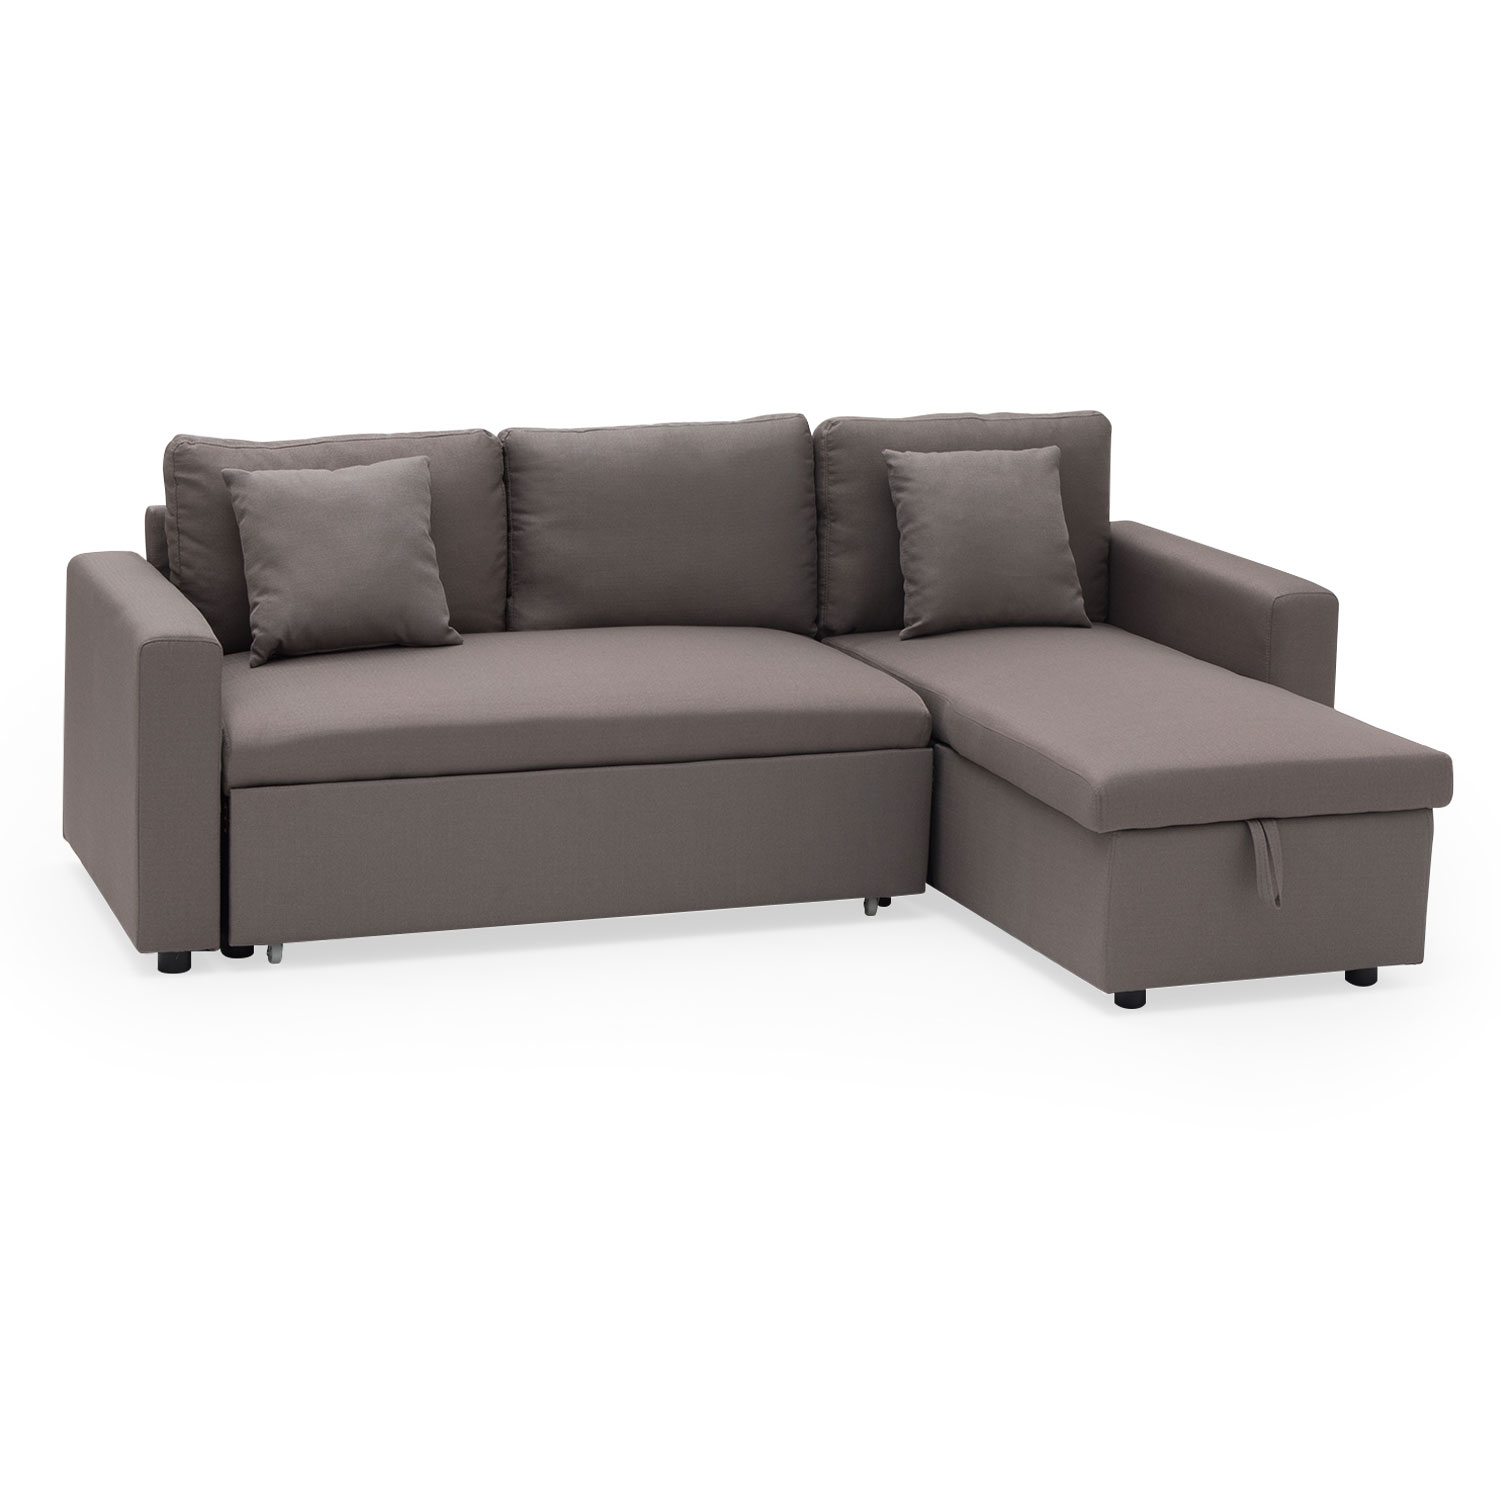 Canapé d'angle convertible CLARK 3 places taupe